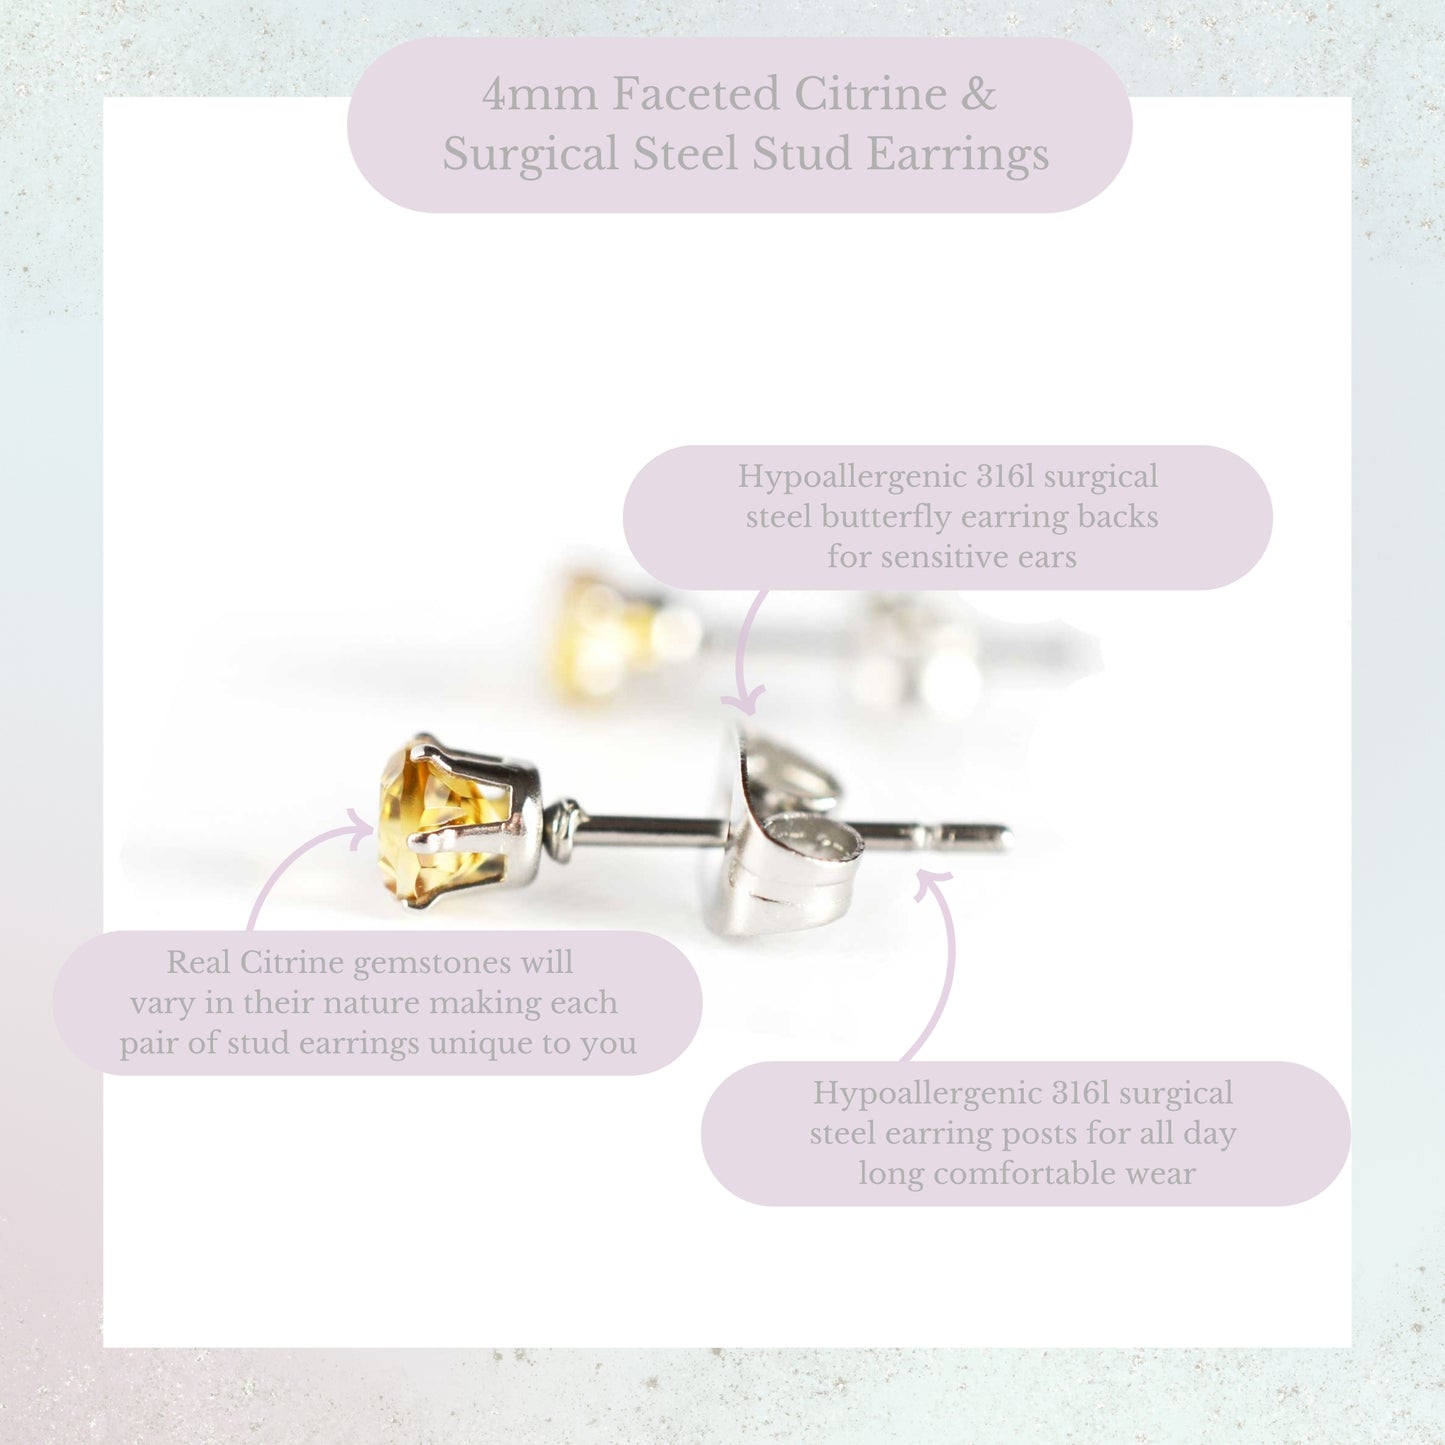 Product information graphic for 4mm faceted Citrine stud earrings